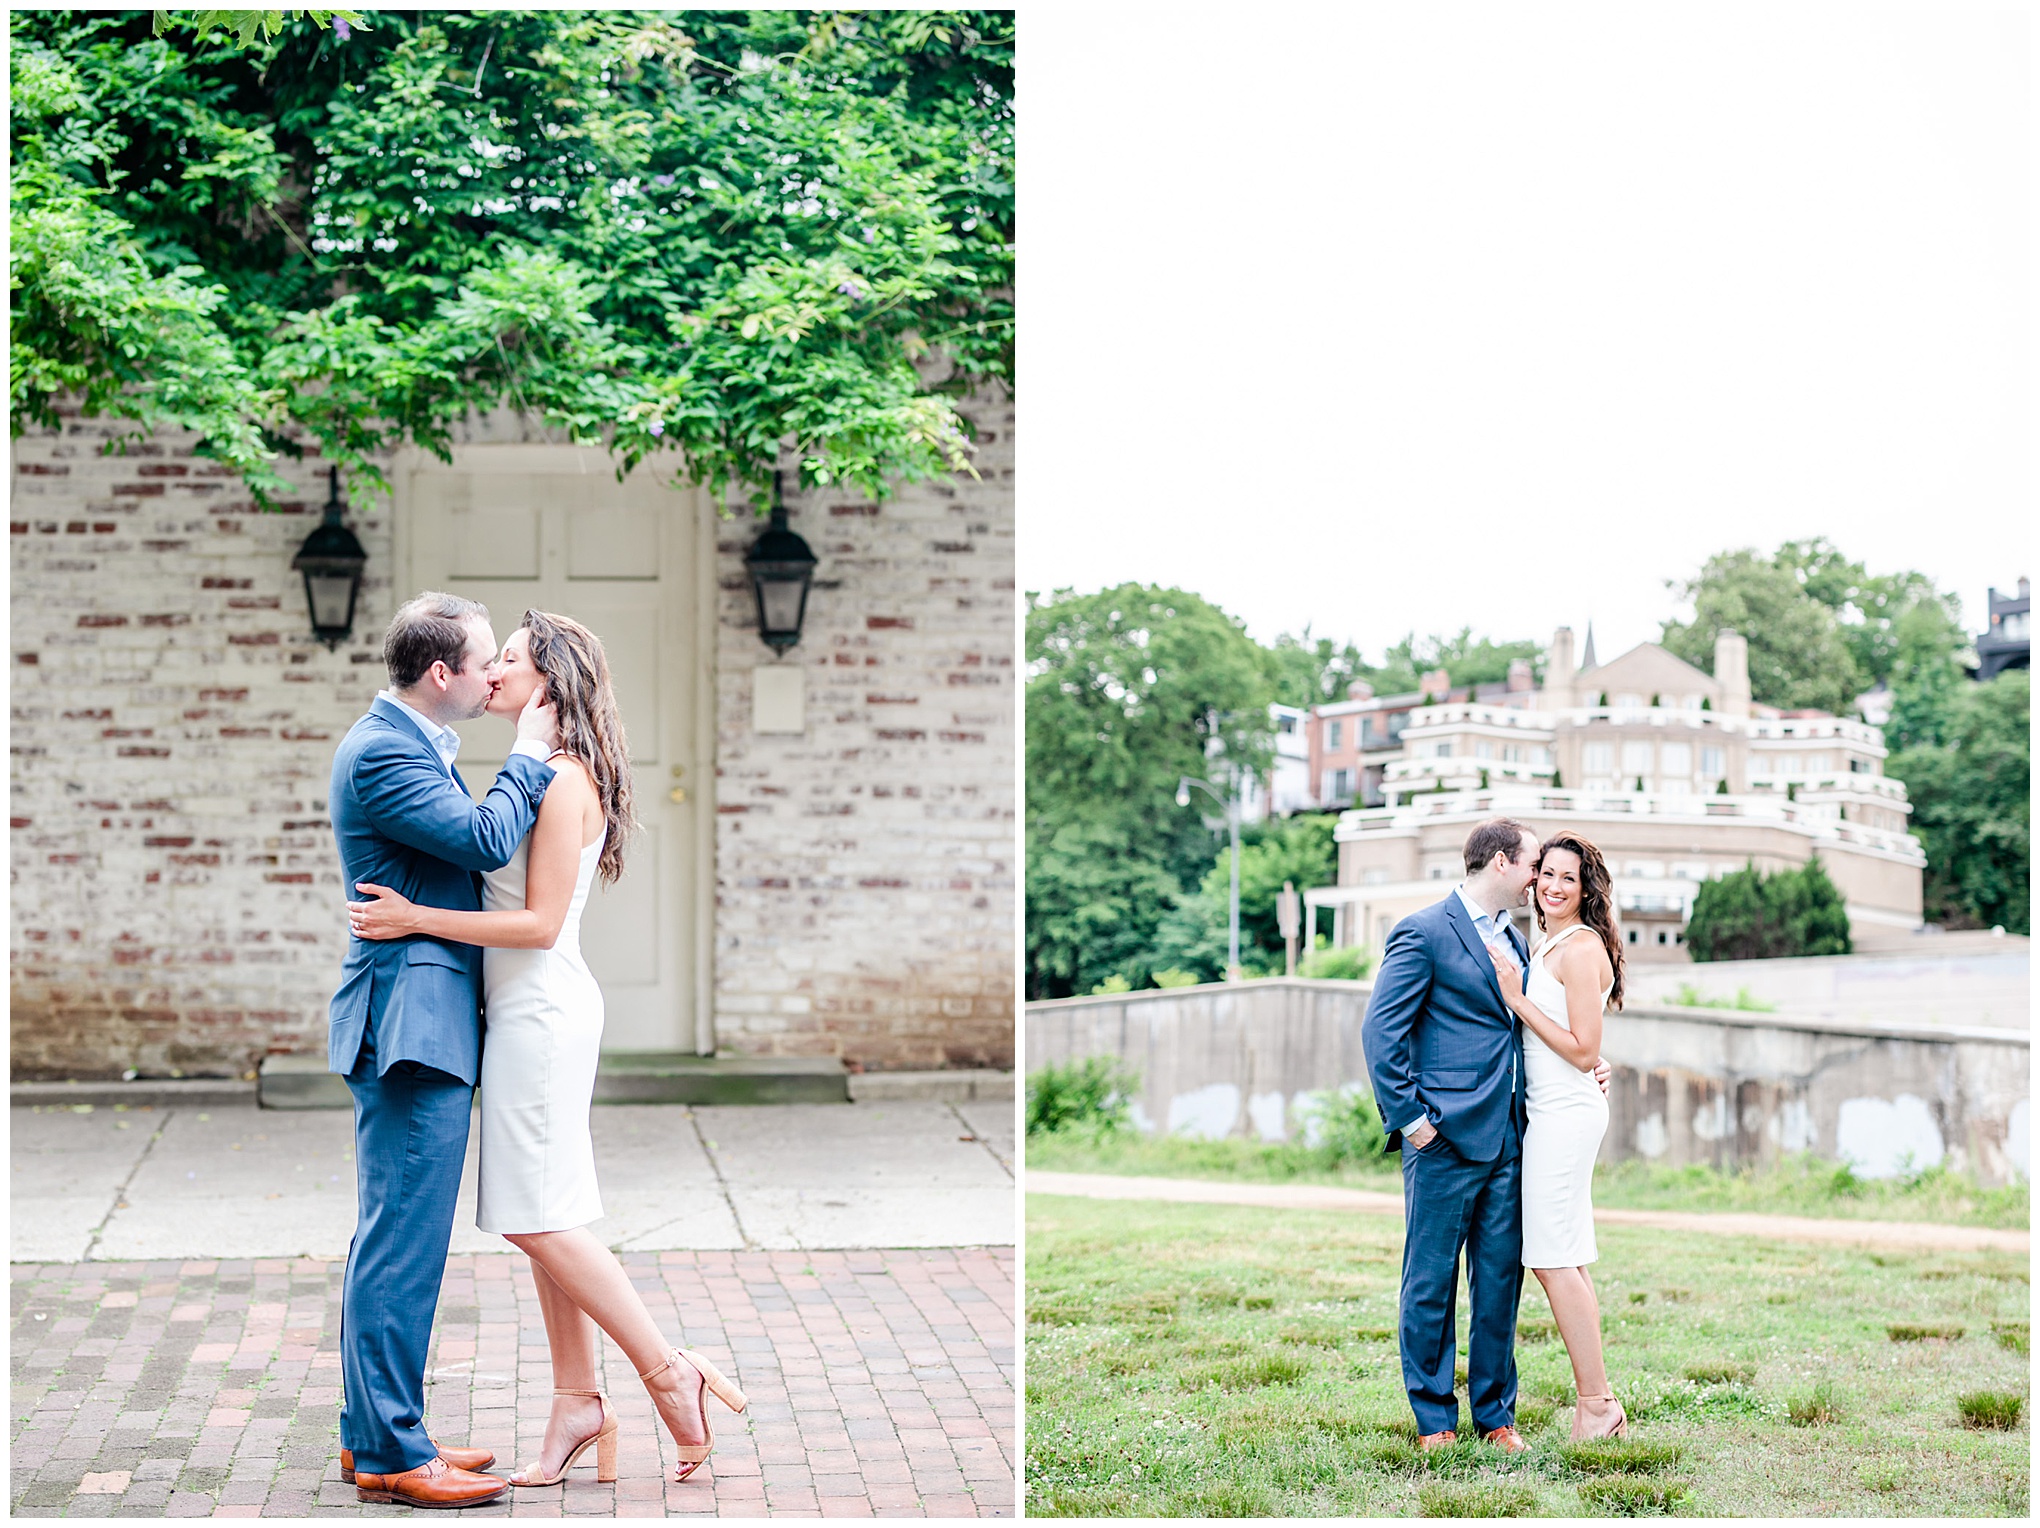 summer Georgetown engagement photos, DC engagement photos, classic engagement photos, summer engagement photos, summer engagement photo outfits, classic engagement photo outfits, Rachel E.H. Photography, DC wedding photographer, DC engagement photographer, DC proposal photographer, DC photographer, couple kissing